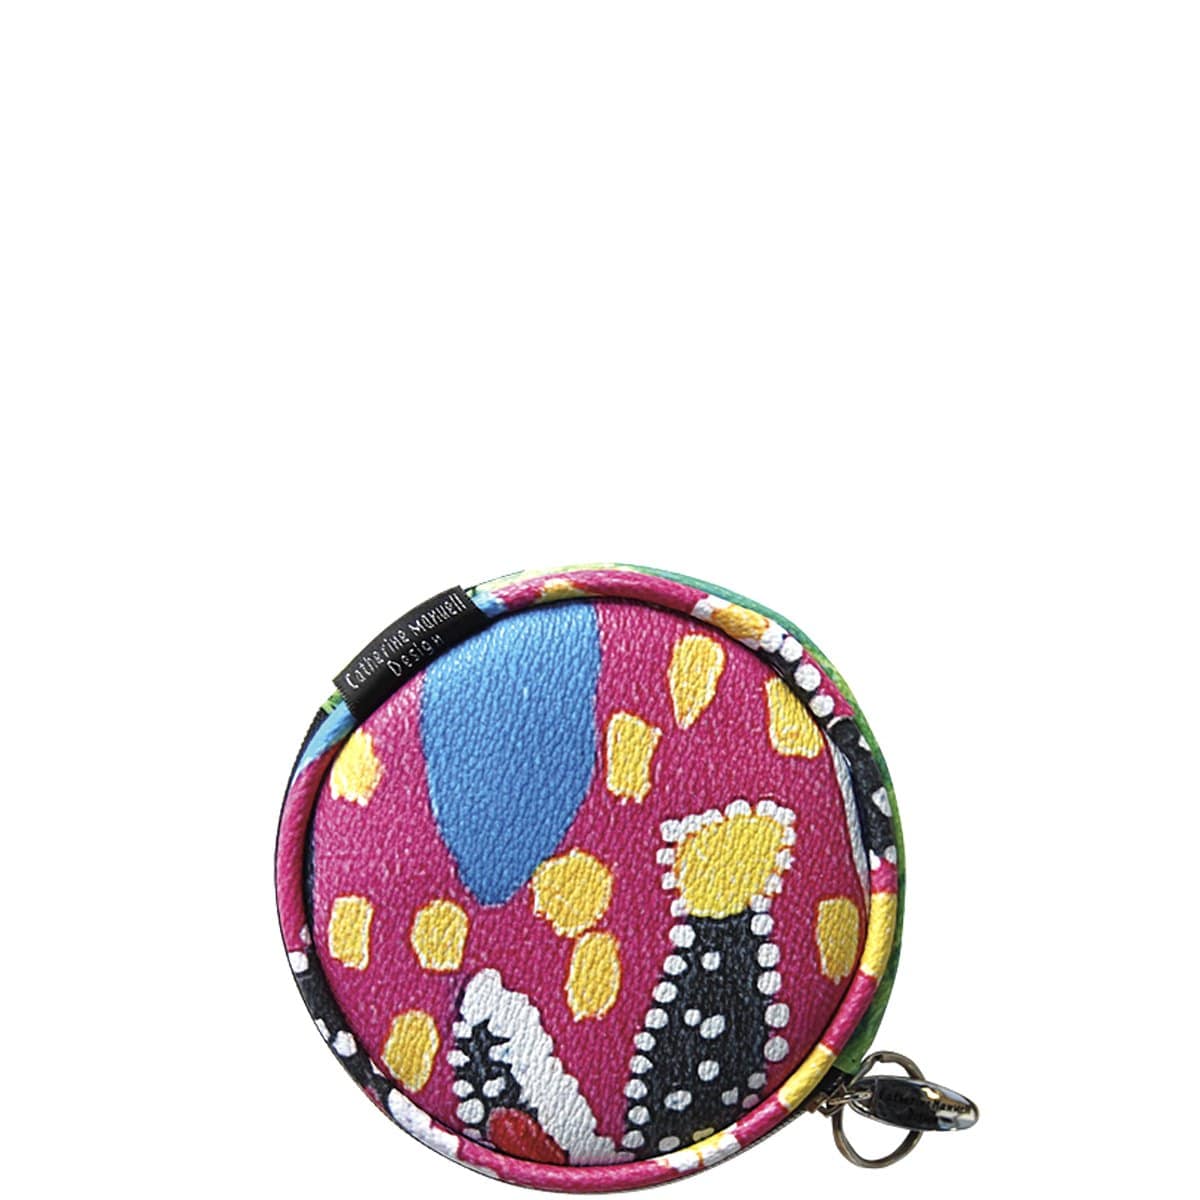 Full Moon Coin Purse AAP - Running Spring Water